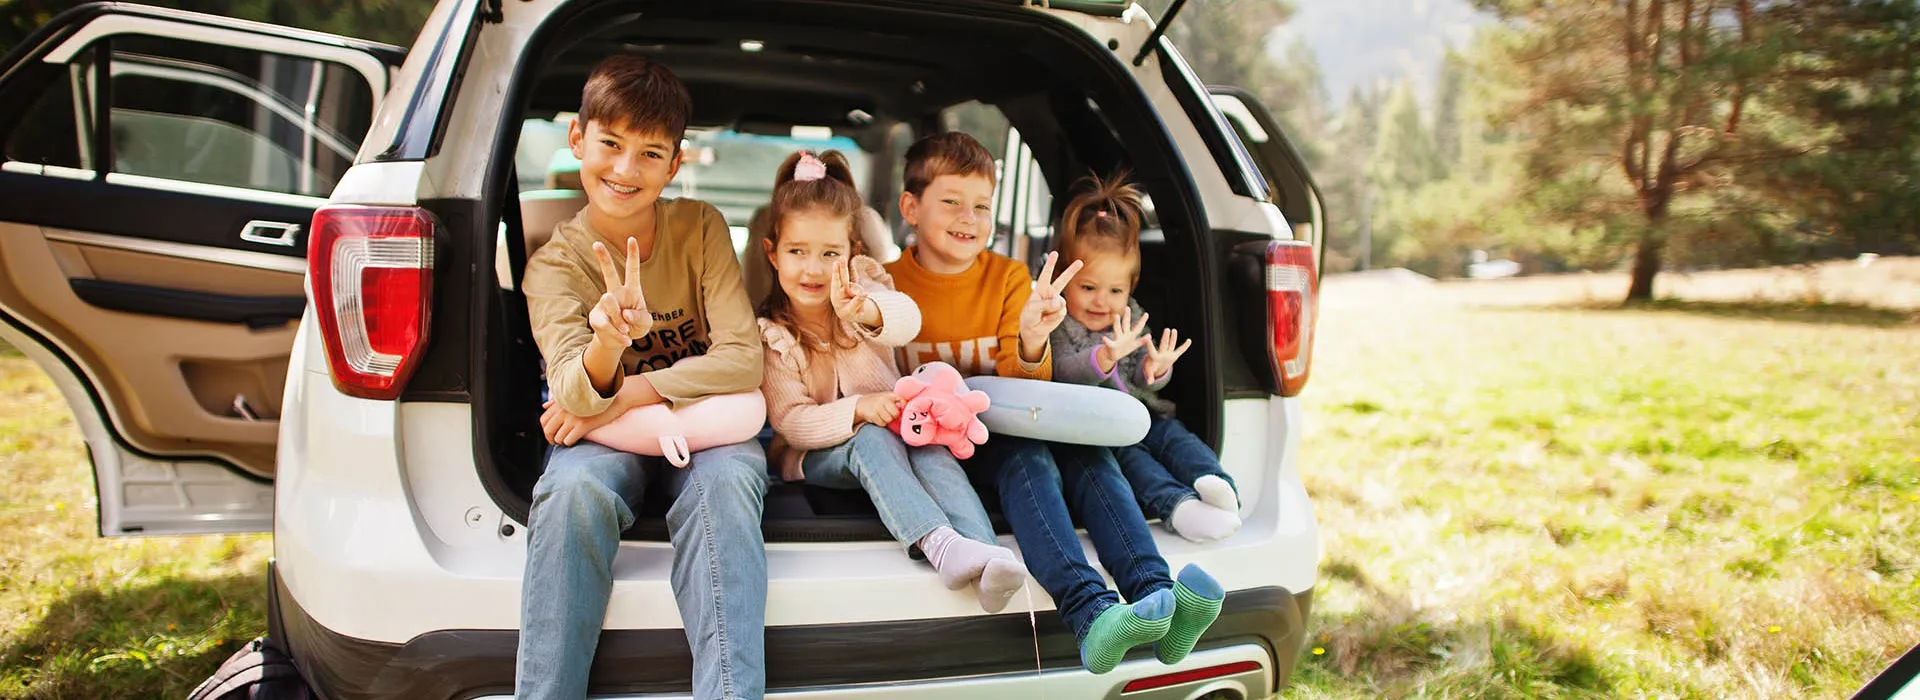 four smiling children in car boot 